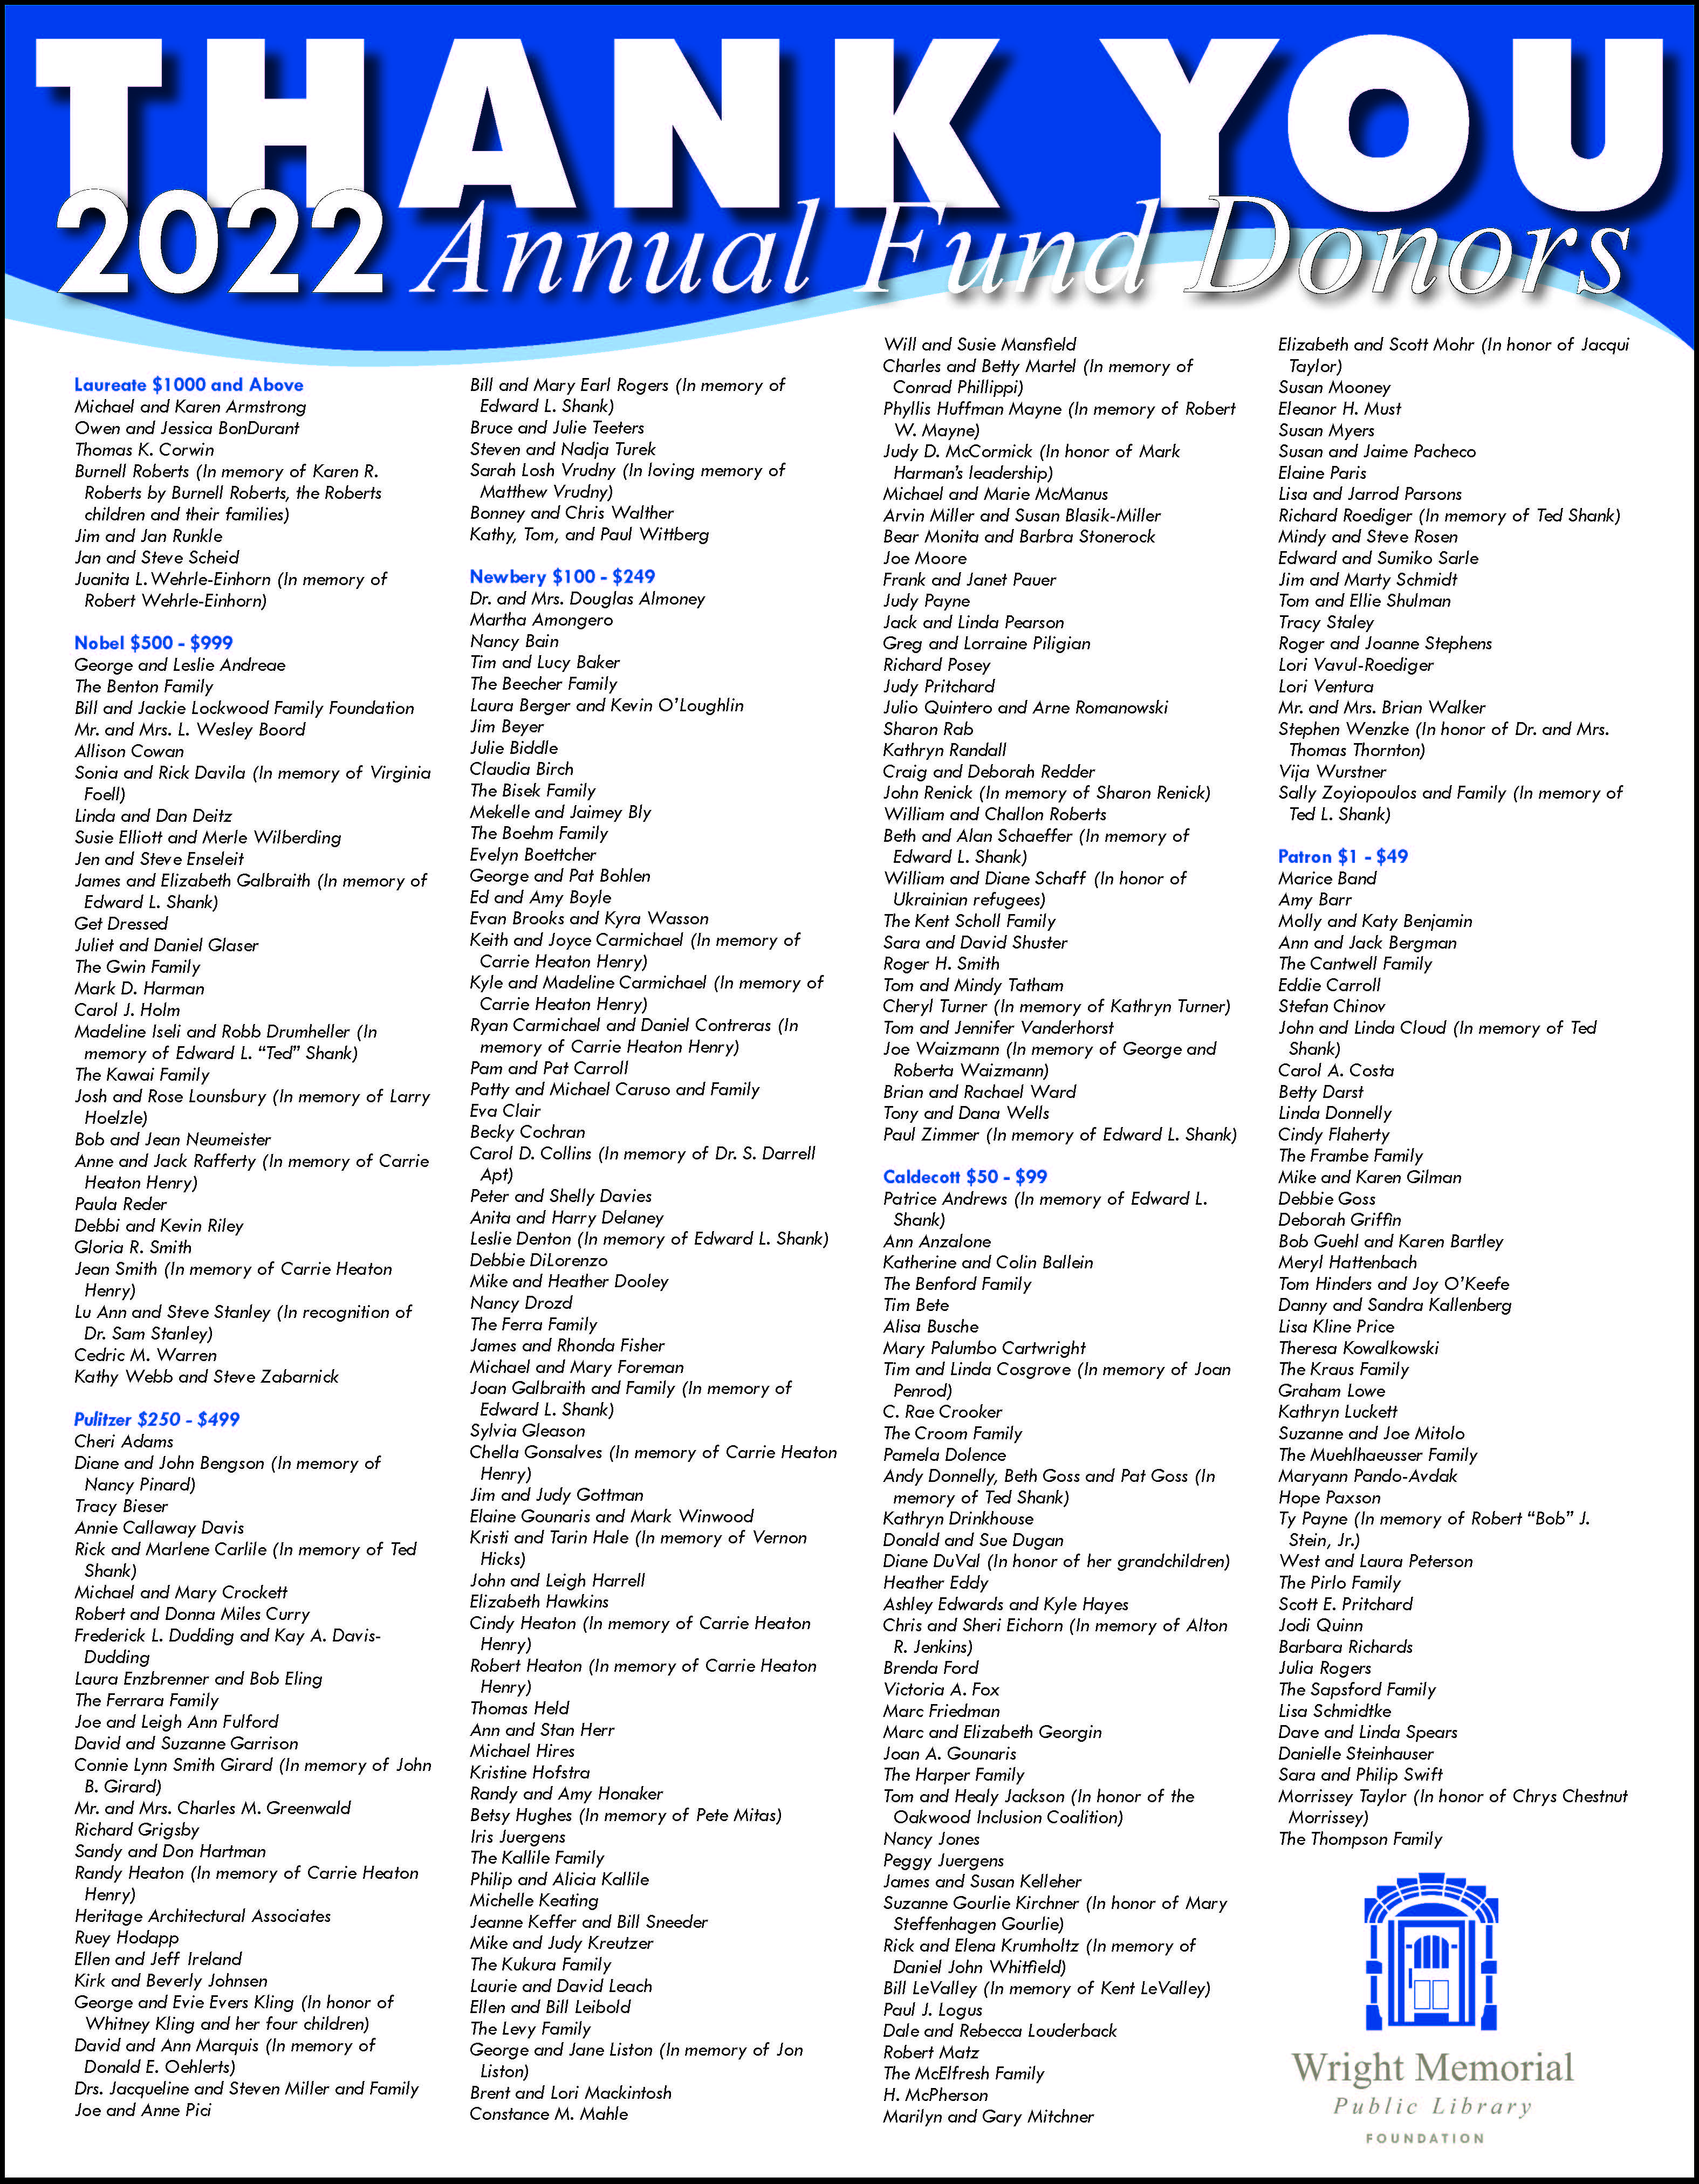 Wright Library Foundation 2022 Annual Campaign Donor List